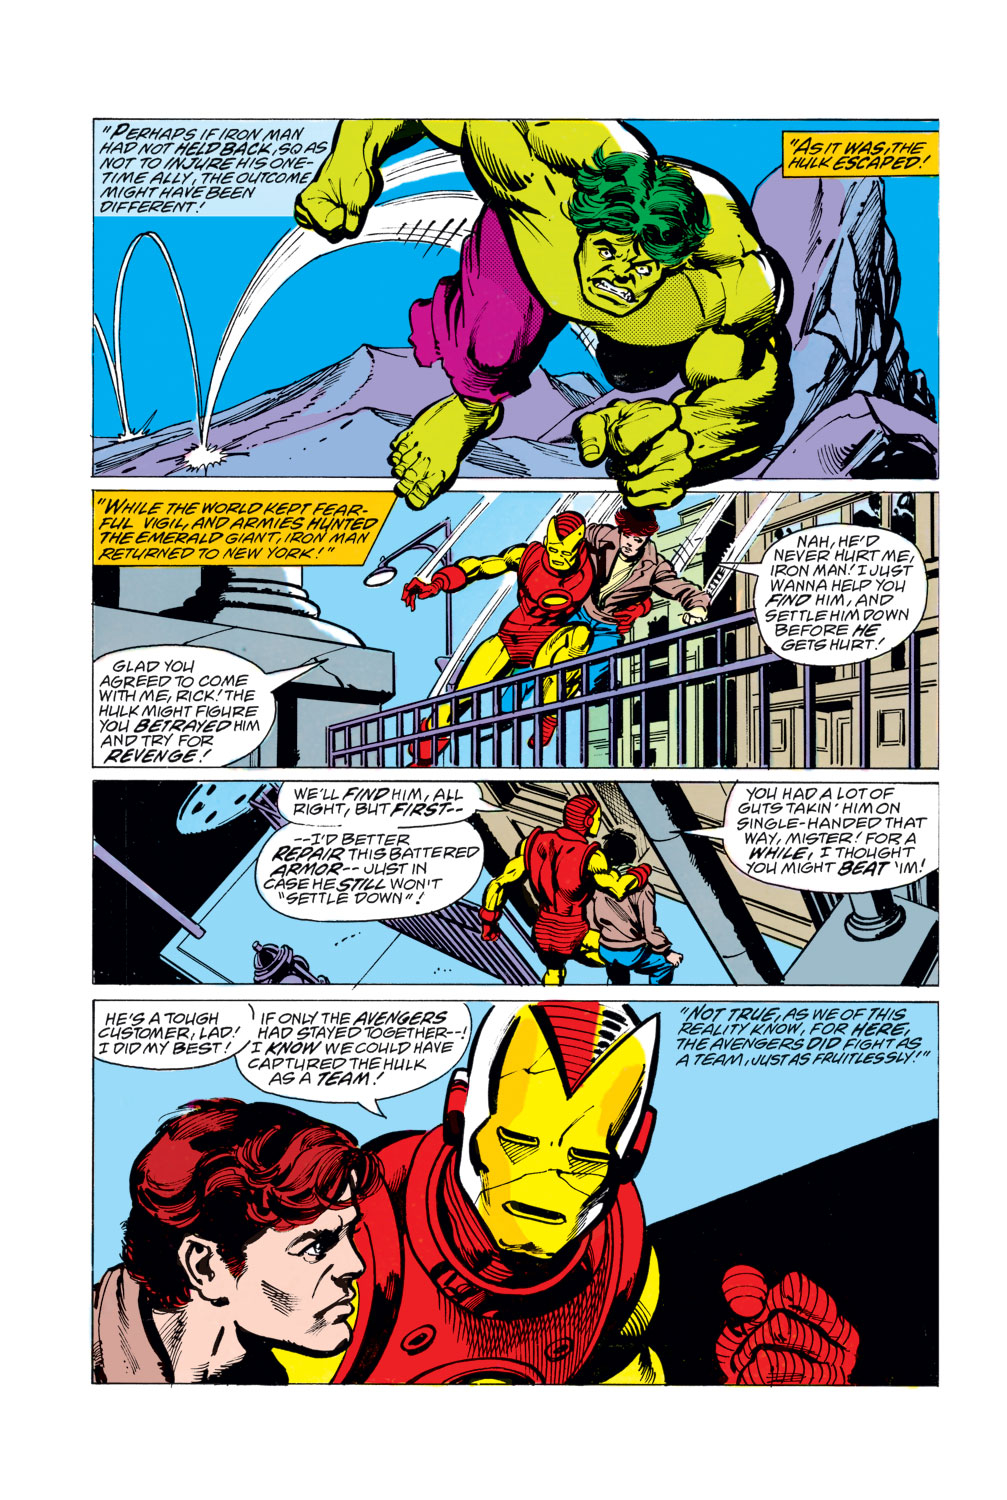 What If? (1977) issue 3 - The Avengers had never been - Page 9